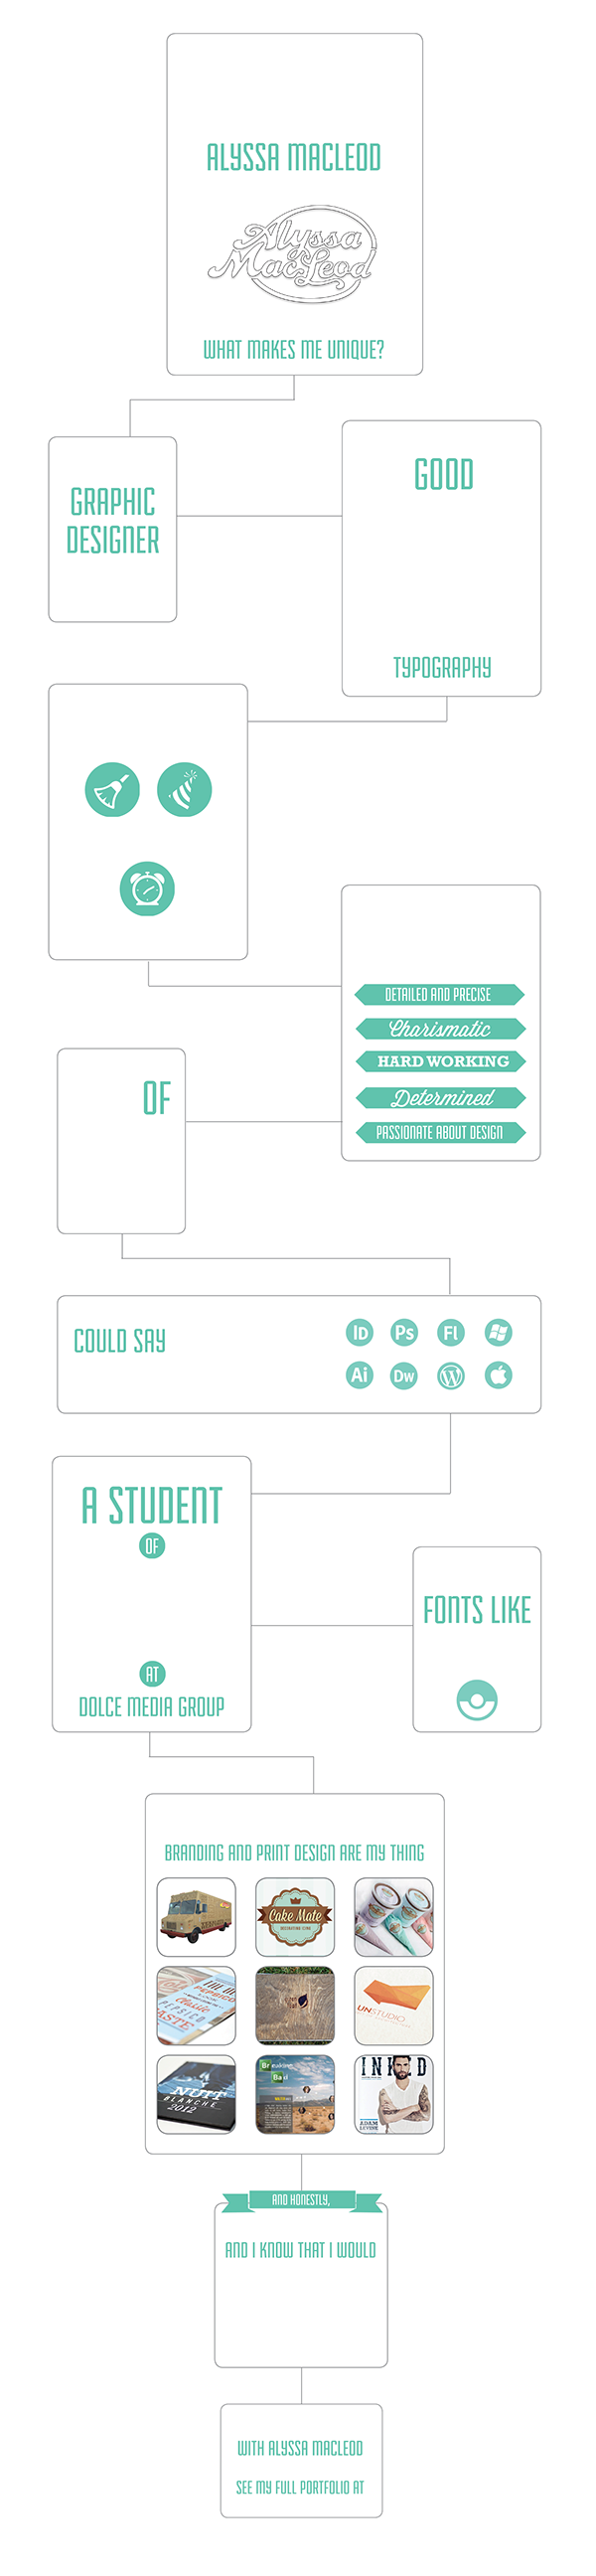 infographic Self Promotion teal black icons type fonts